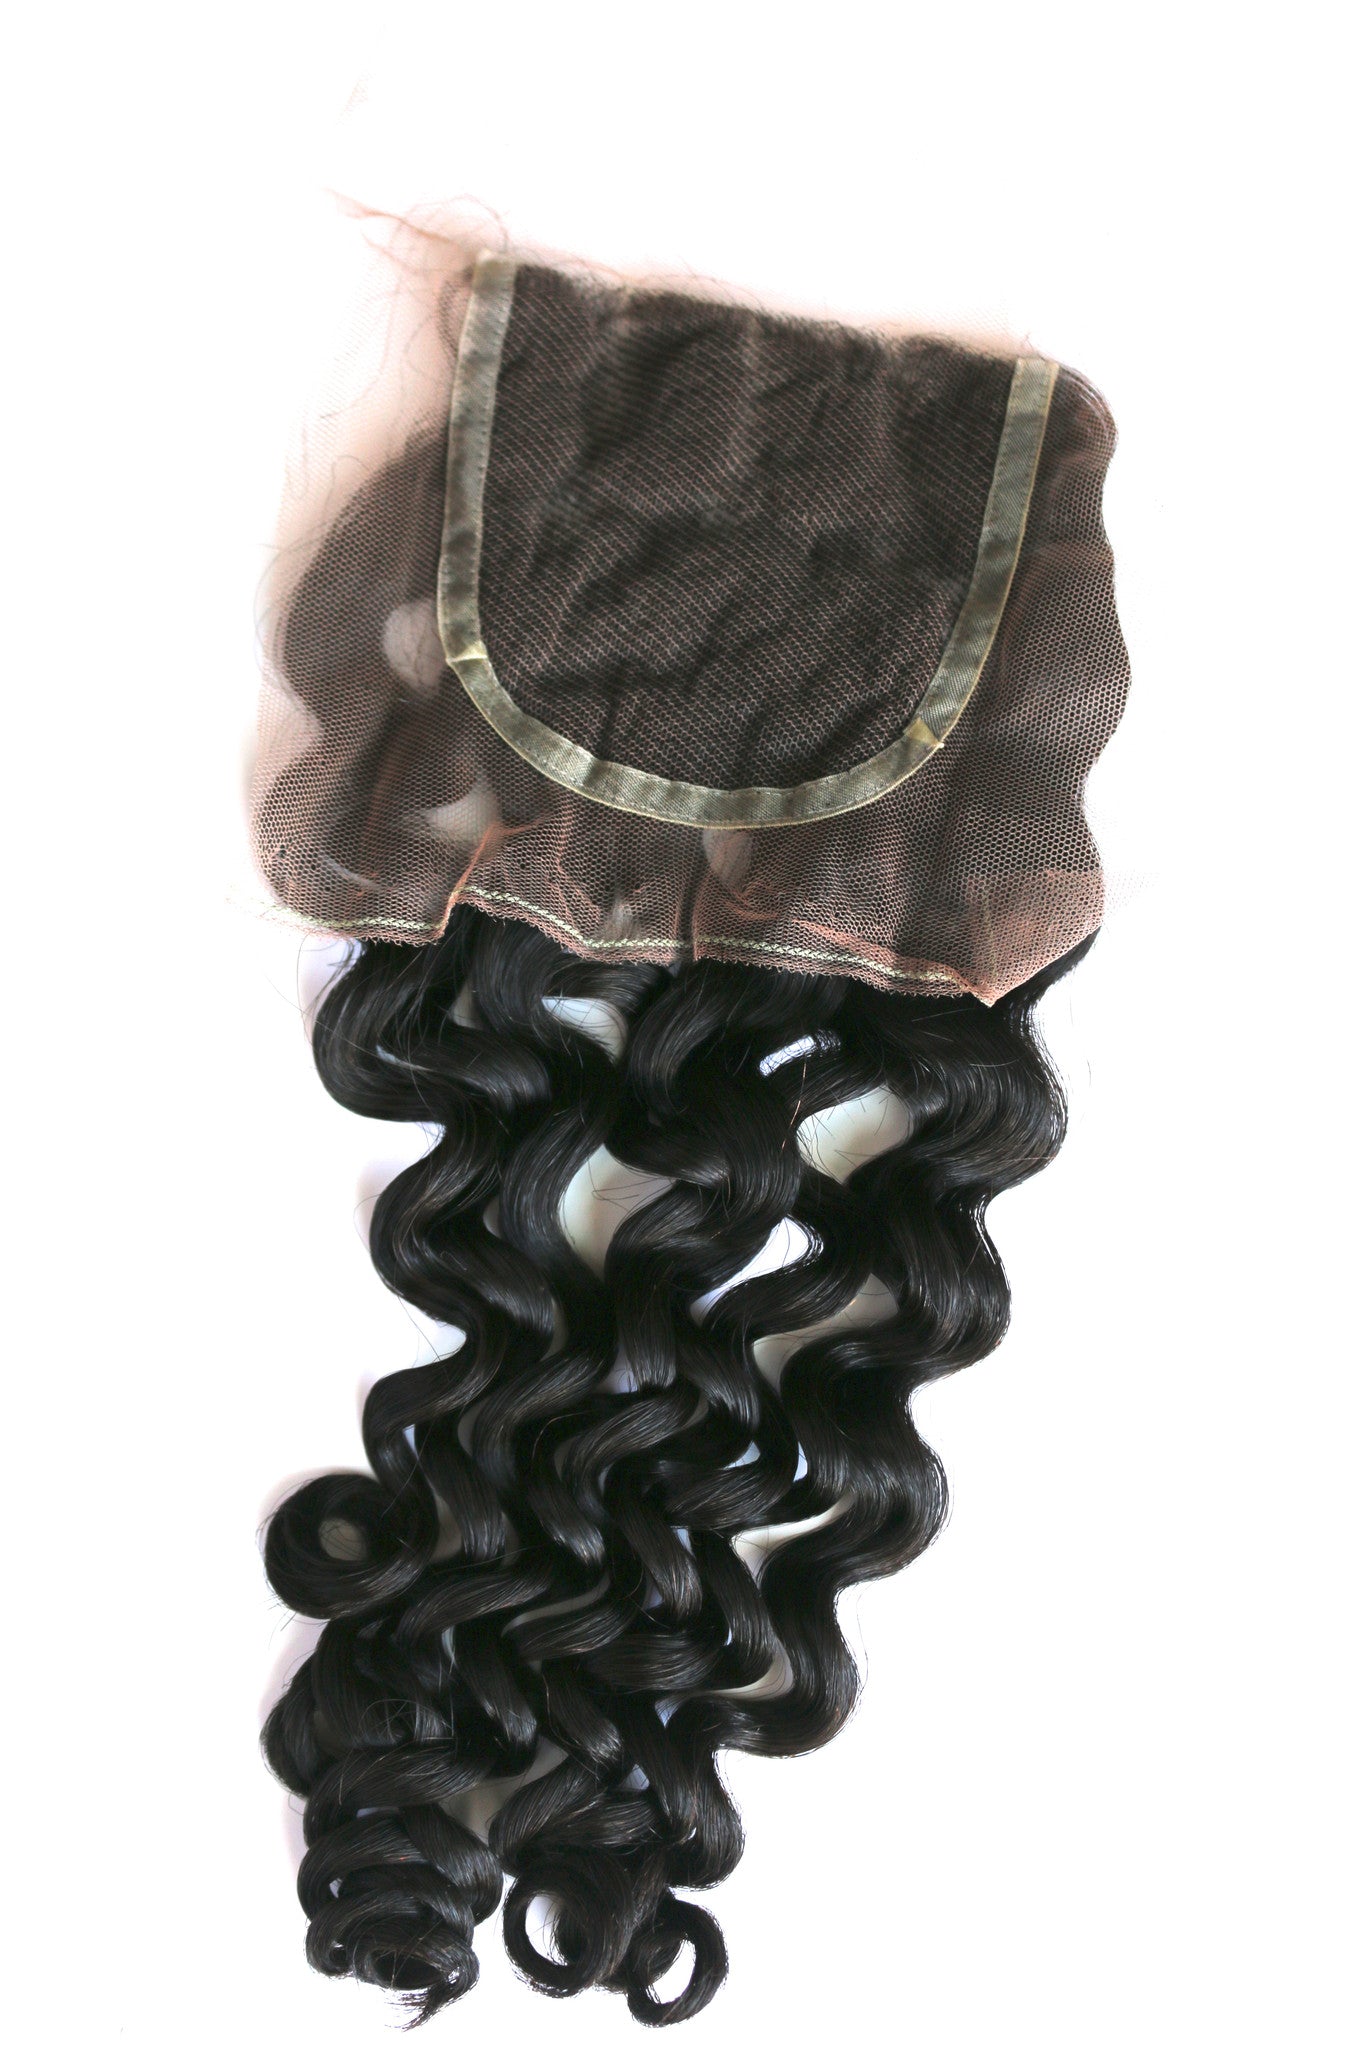 RADIANCE EURASIAN CURLS AND WAVES CLOSURE 16"